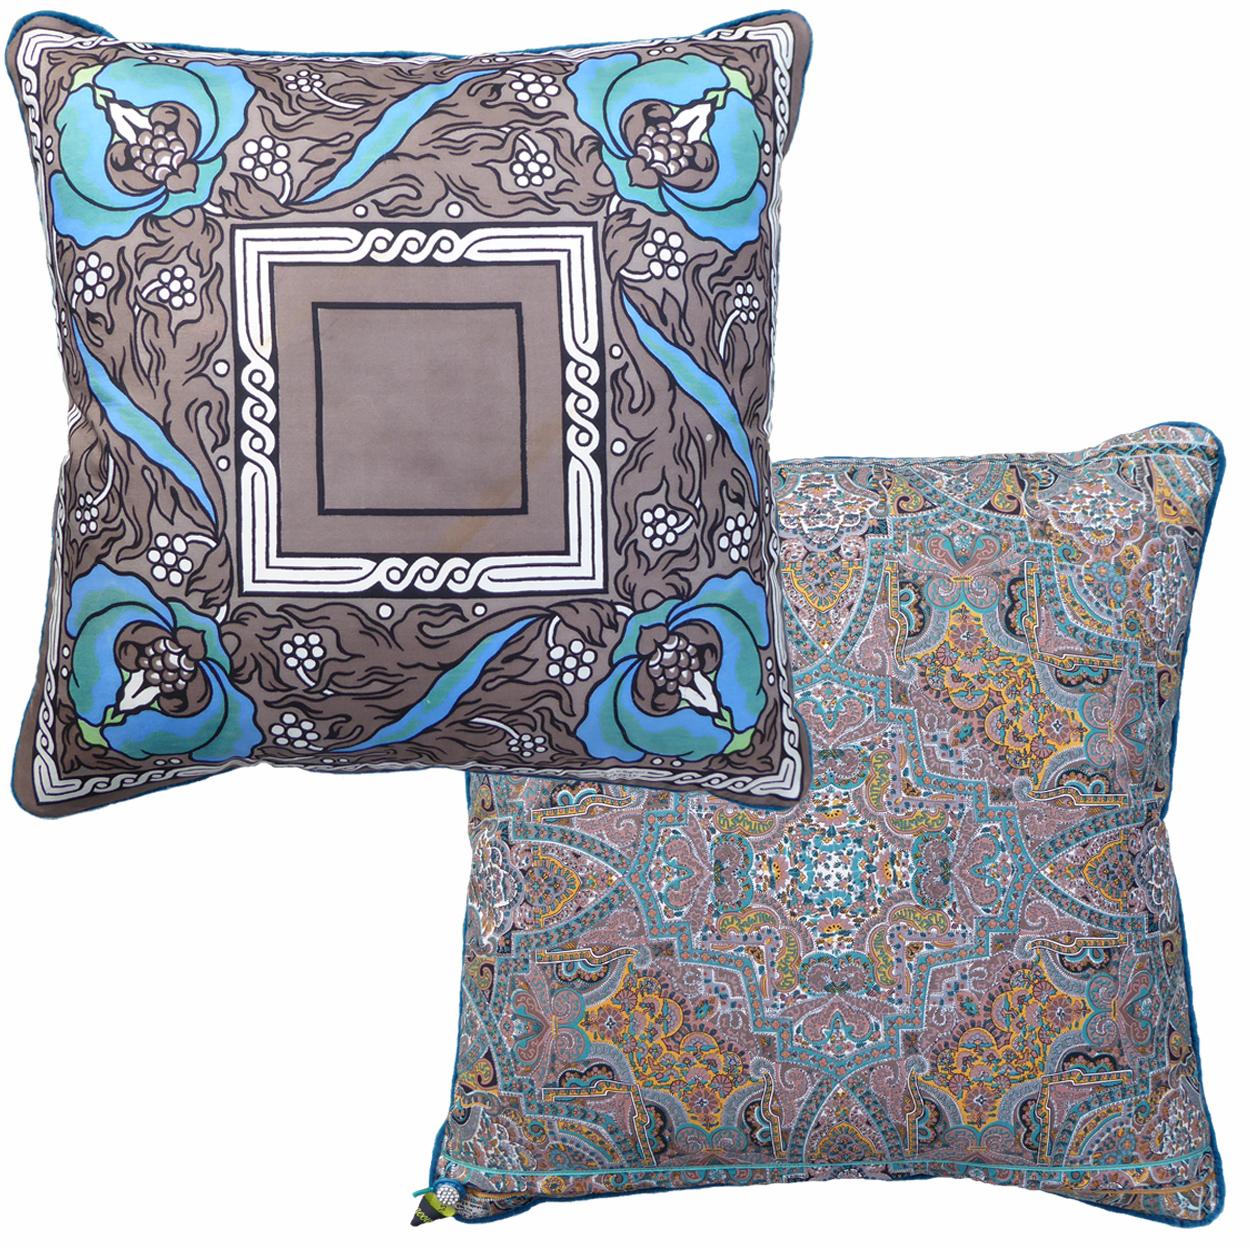 Arts and Crafts 'Vintage Cushions' Luxury Bespoke Silk Pillow ‘Liberty Nouveau’, Made in London